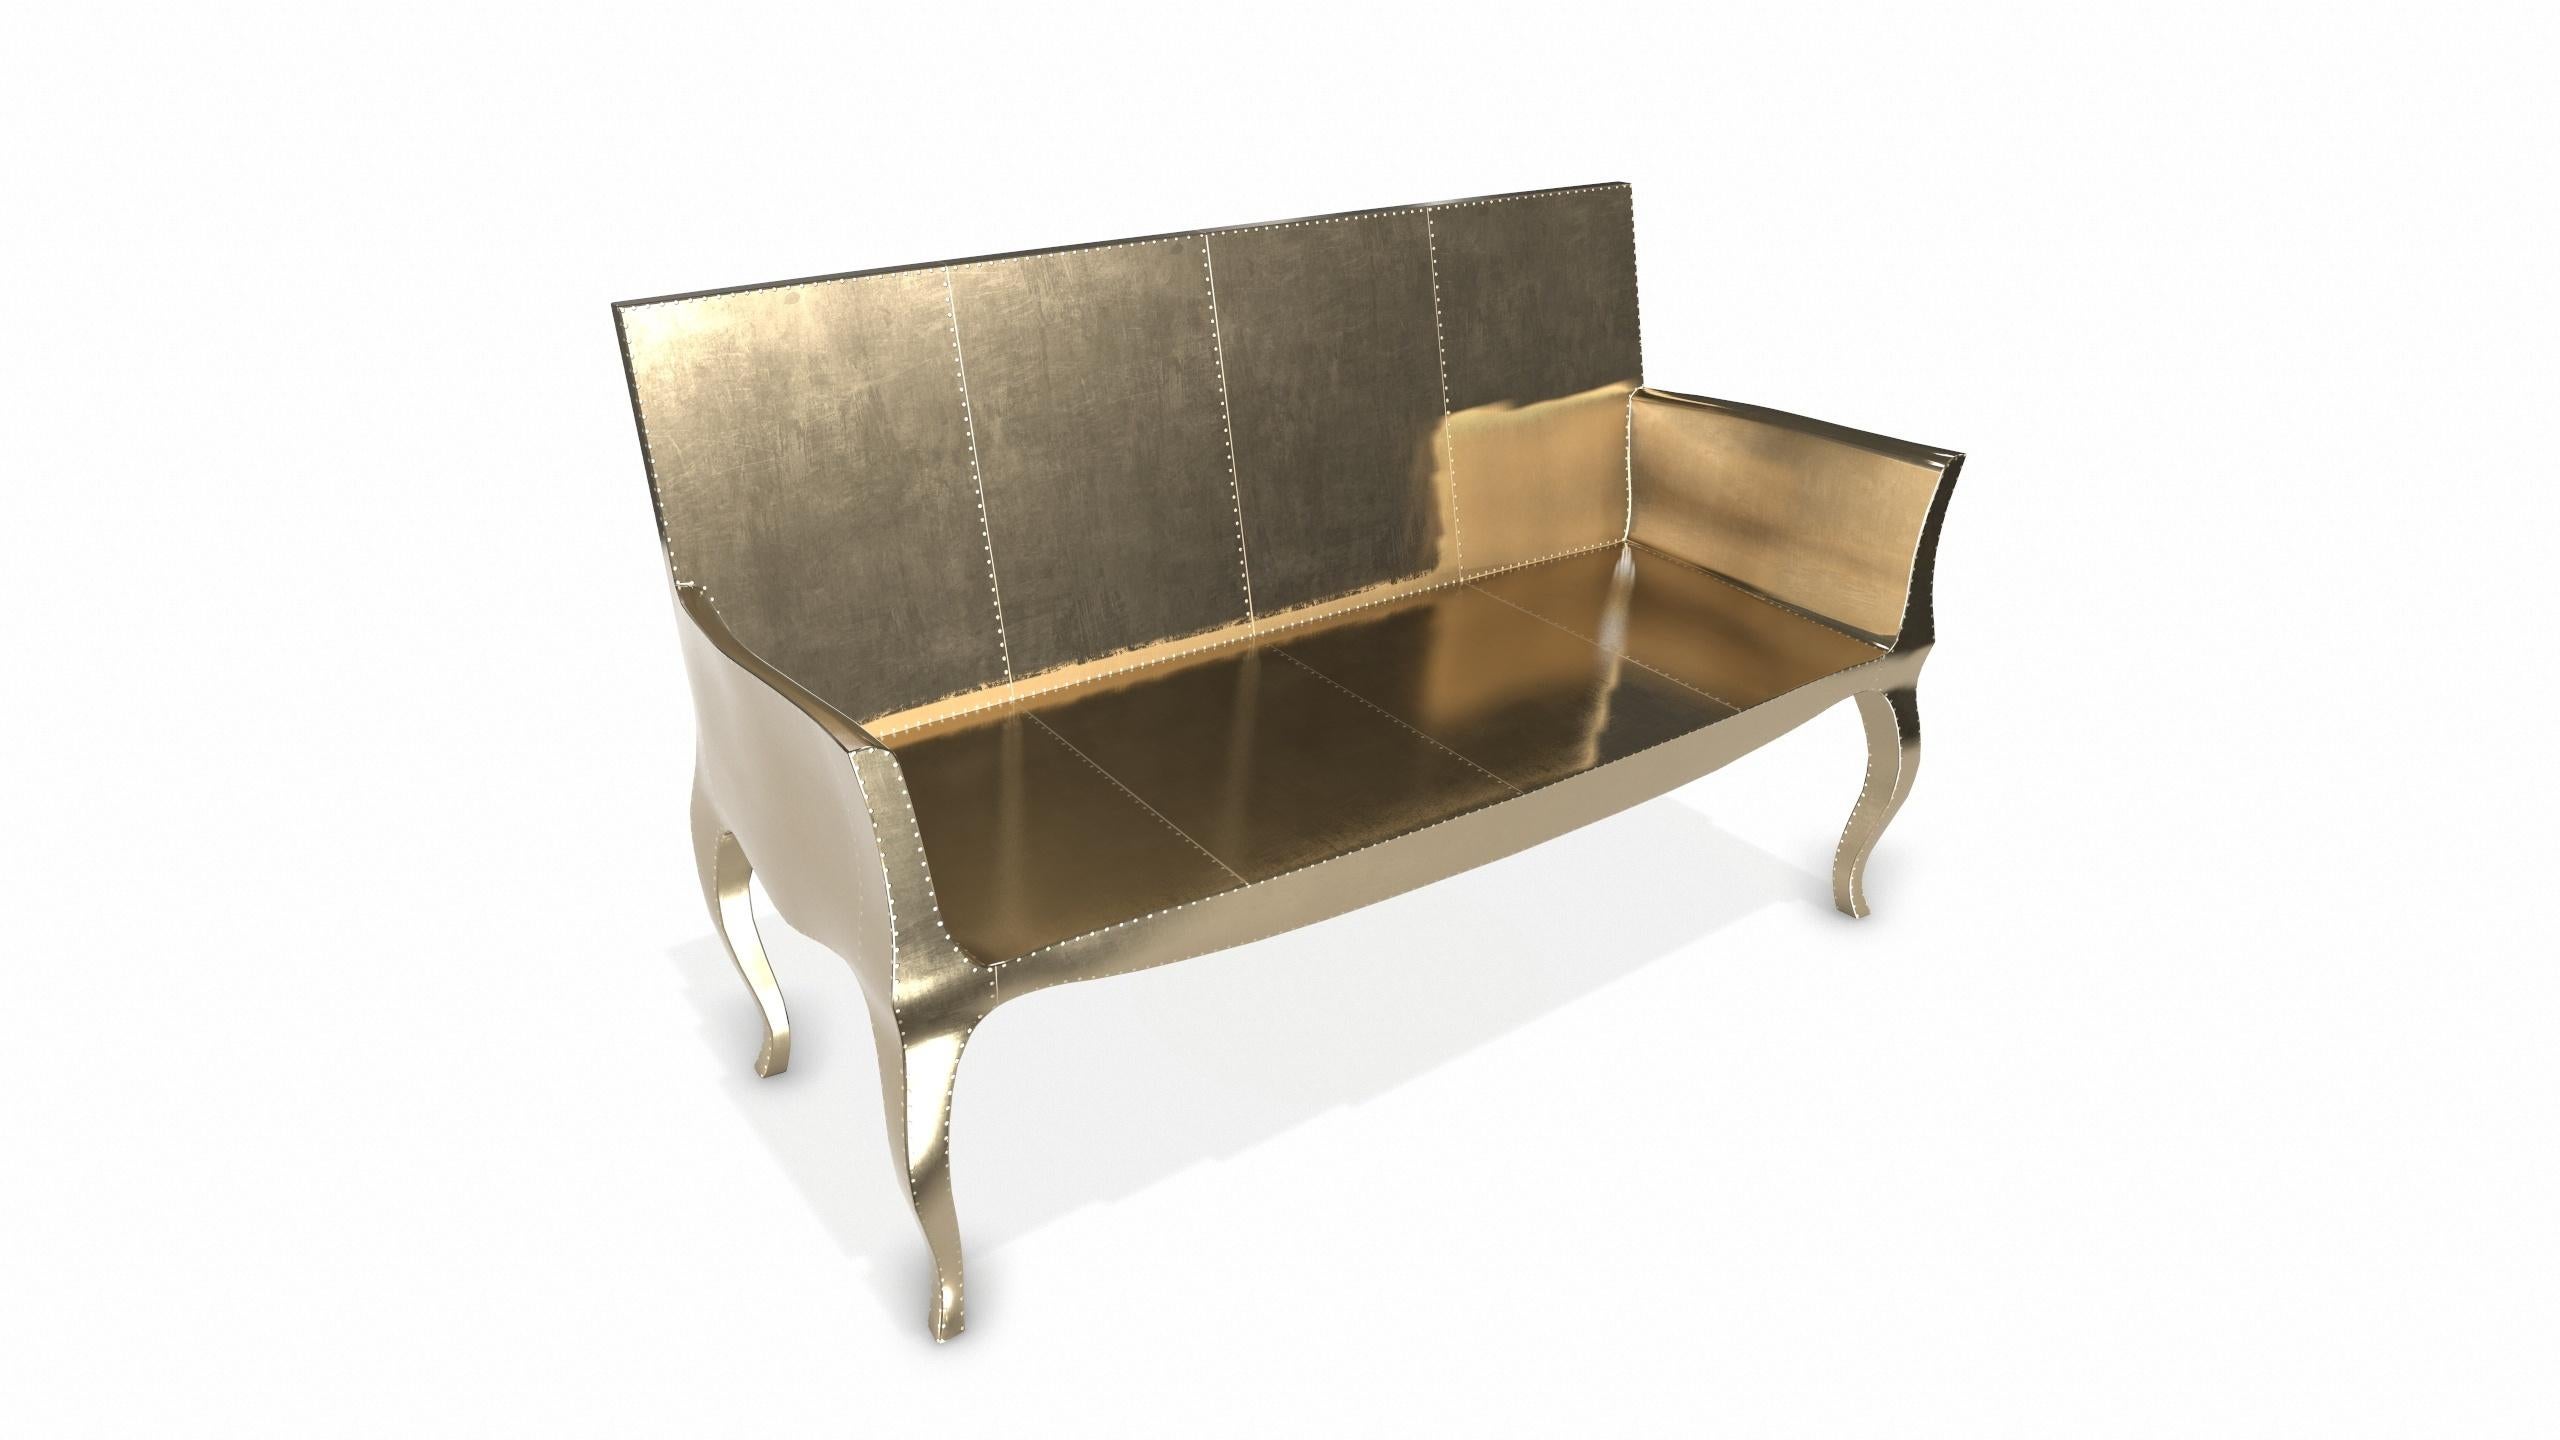 Louise Settee Art Deco Lounge Chairs in Smooth Brass by Paul Mathieu For Sale 2